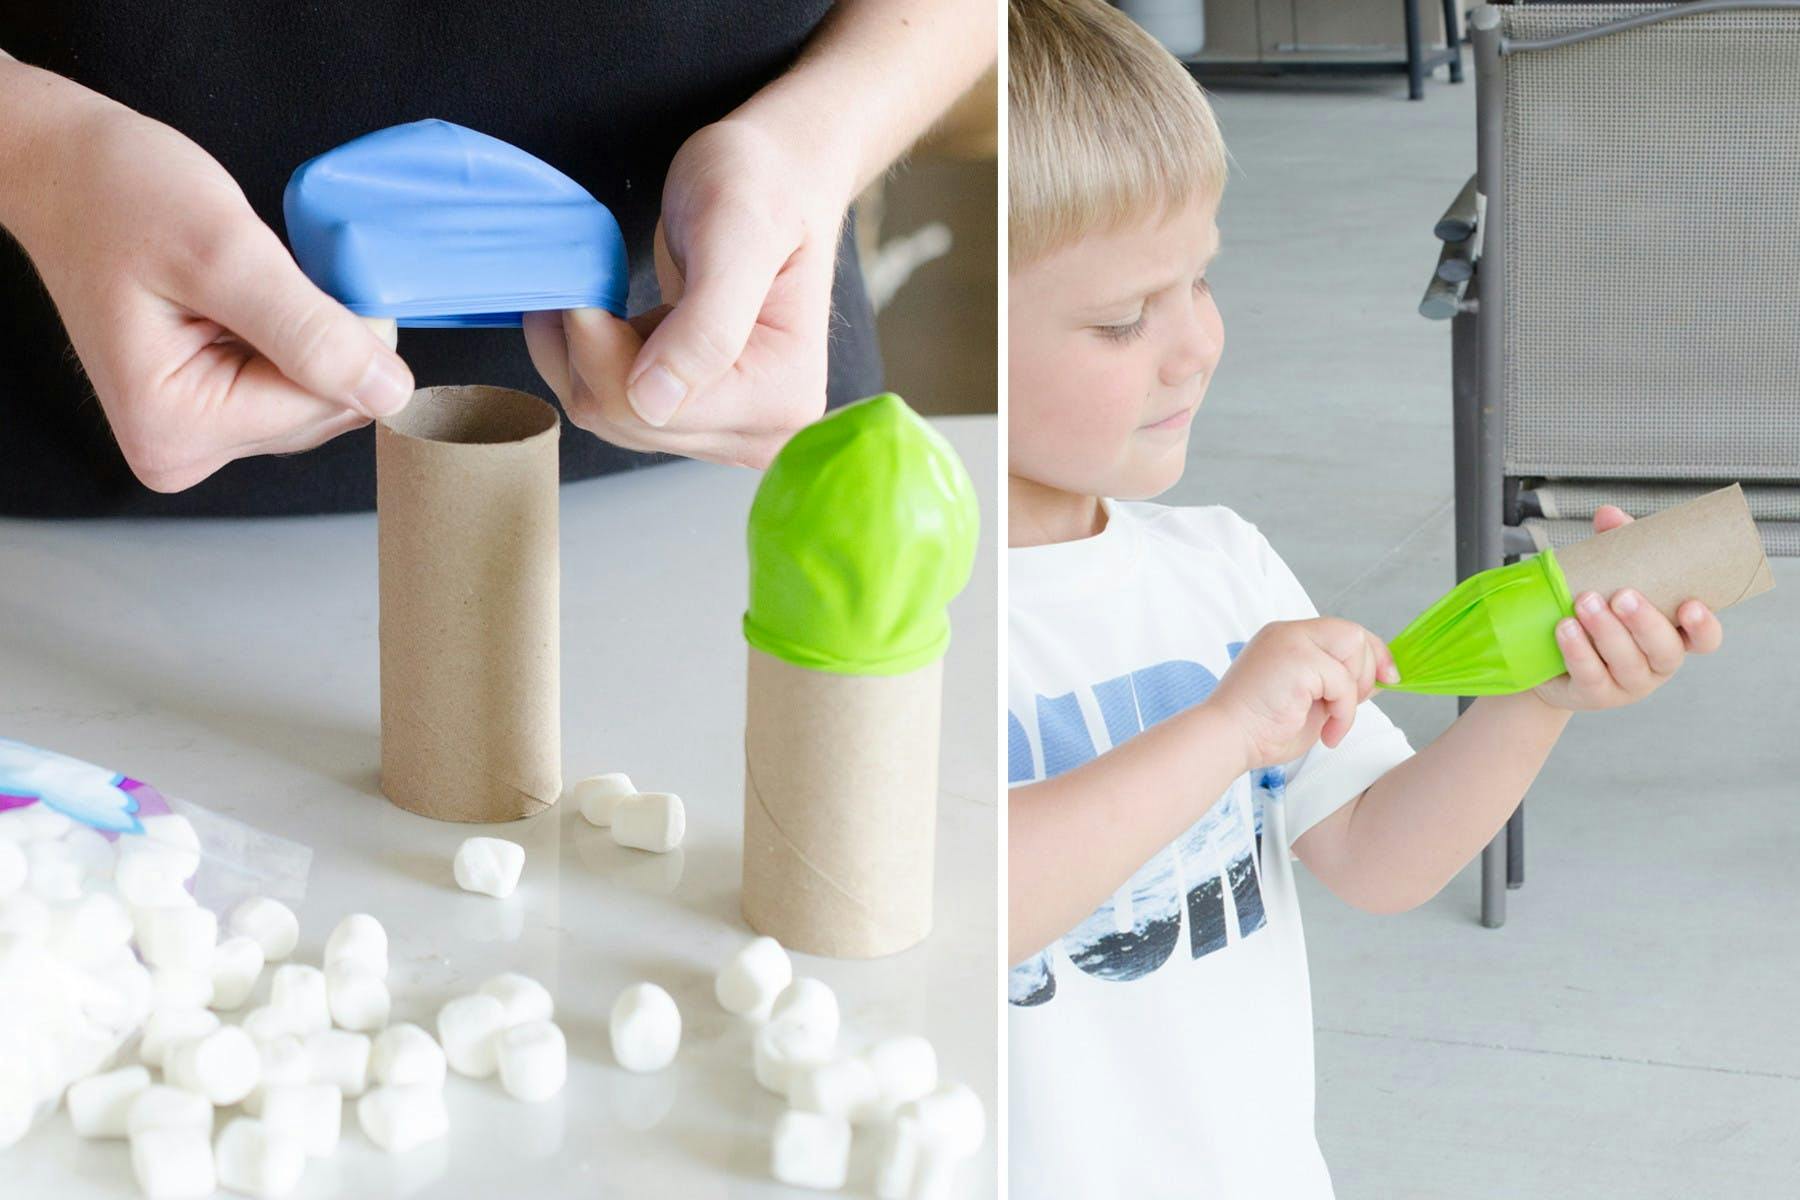 Someone putting a balloon on the end of a toilet paper roll next to some marshmallows on a table, and a child using the contraption to shoot marshmallows